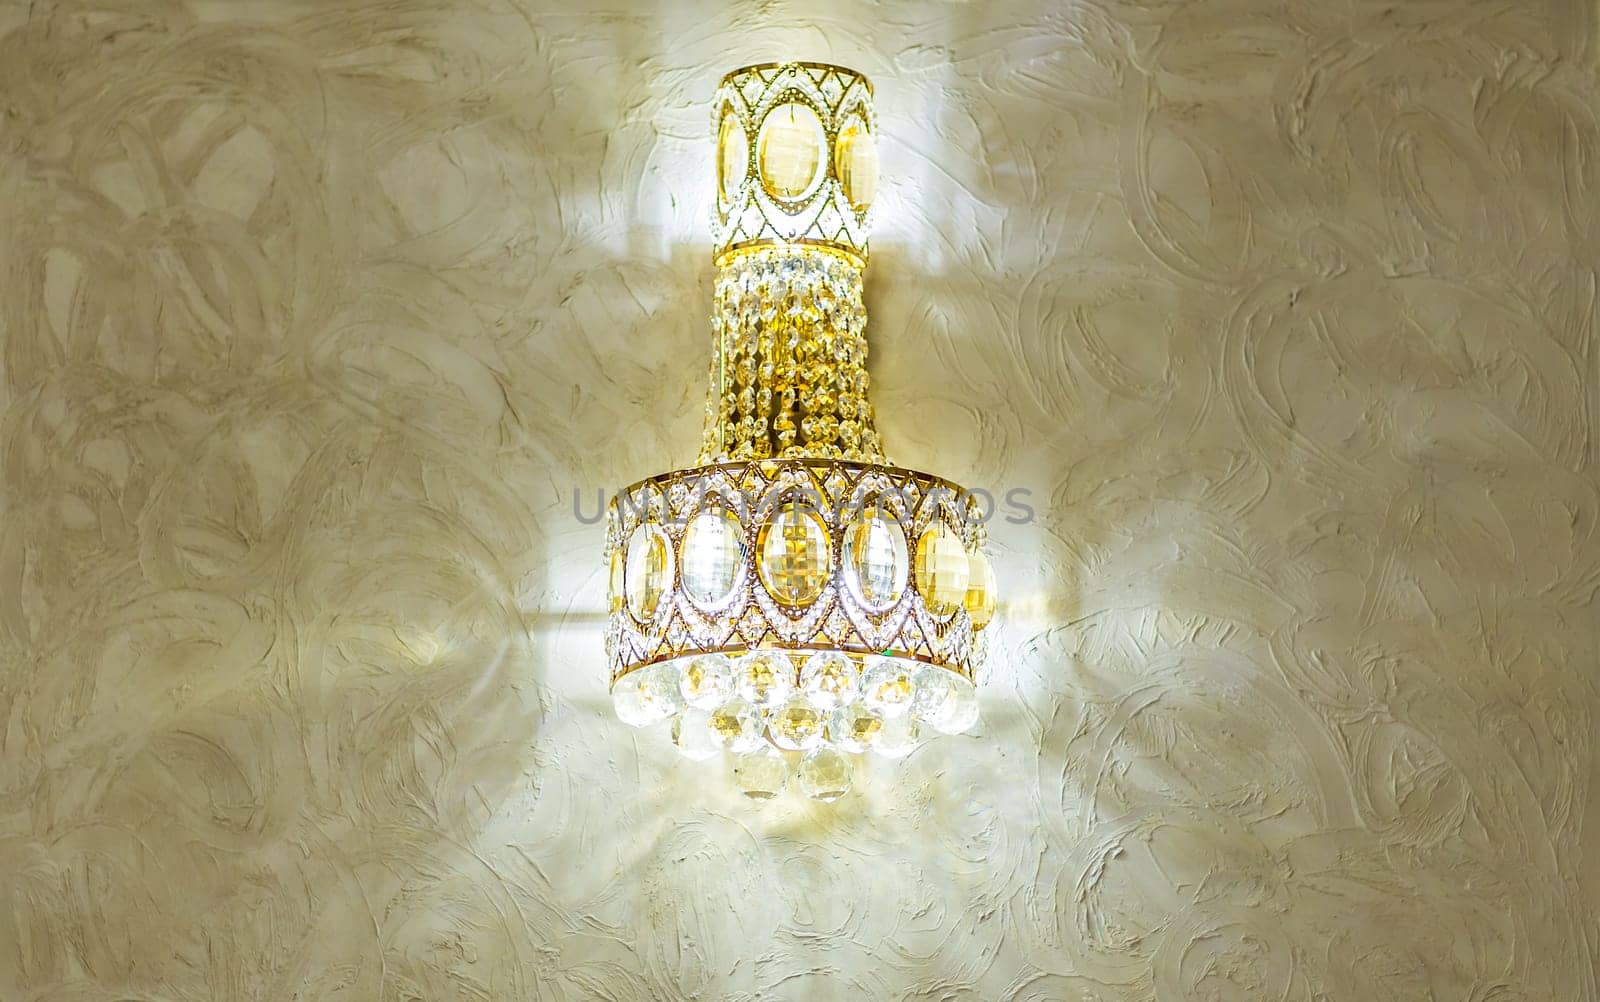 beautiful crystal chandelier in a room. lamp